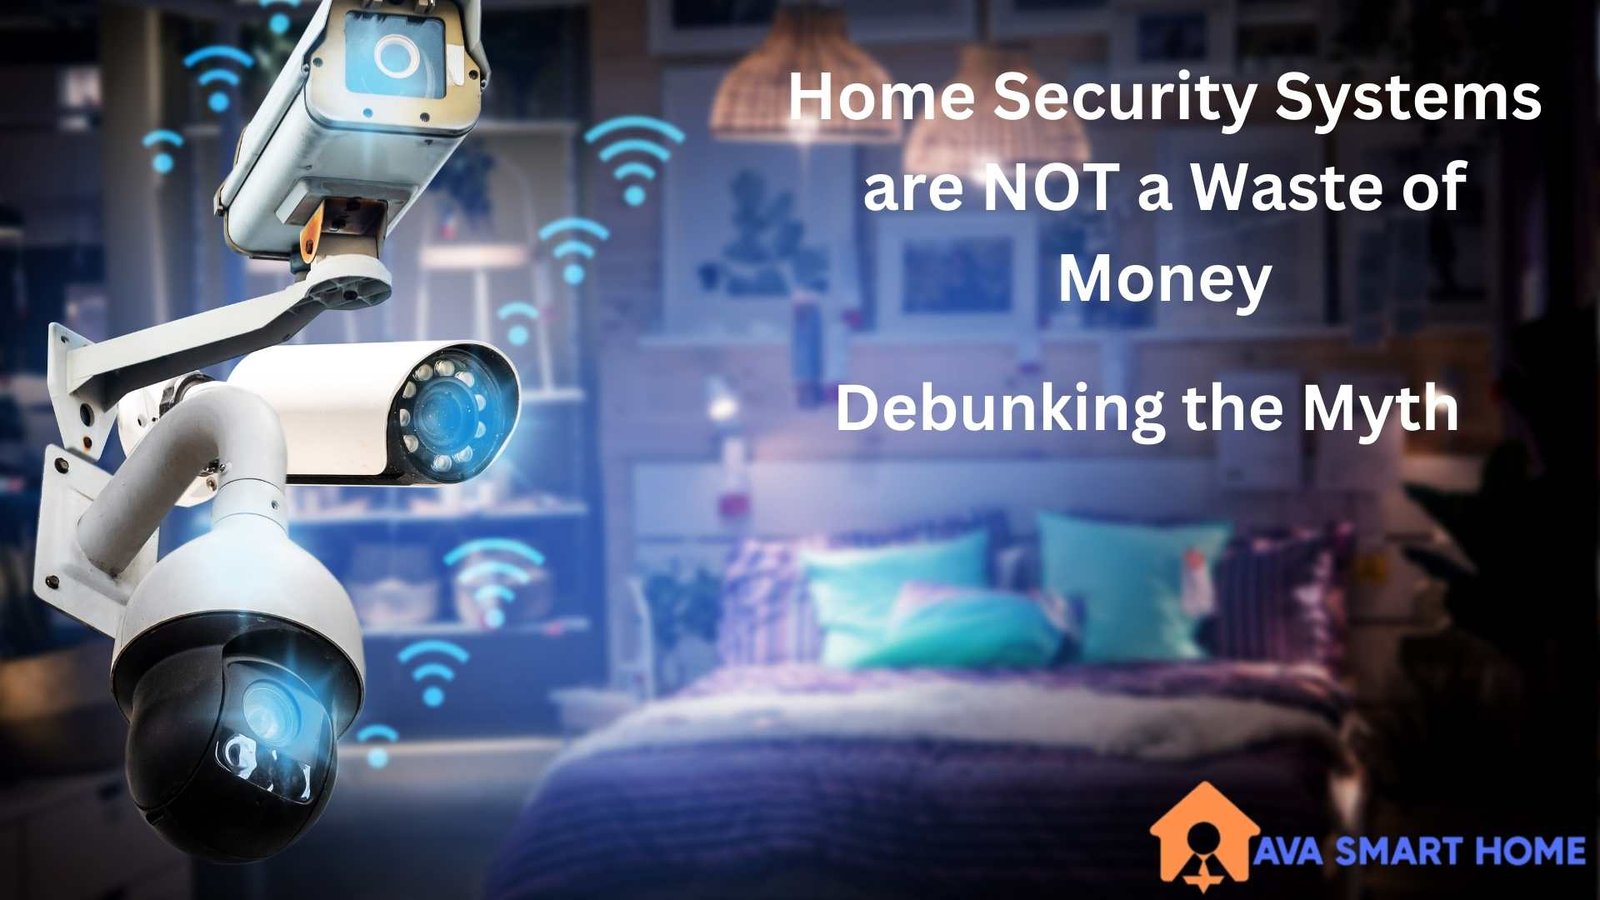 Why Home Security Systems are NOT a Waste of Money